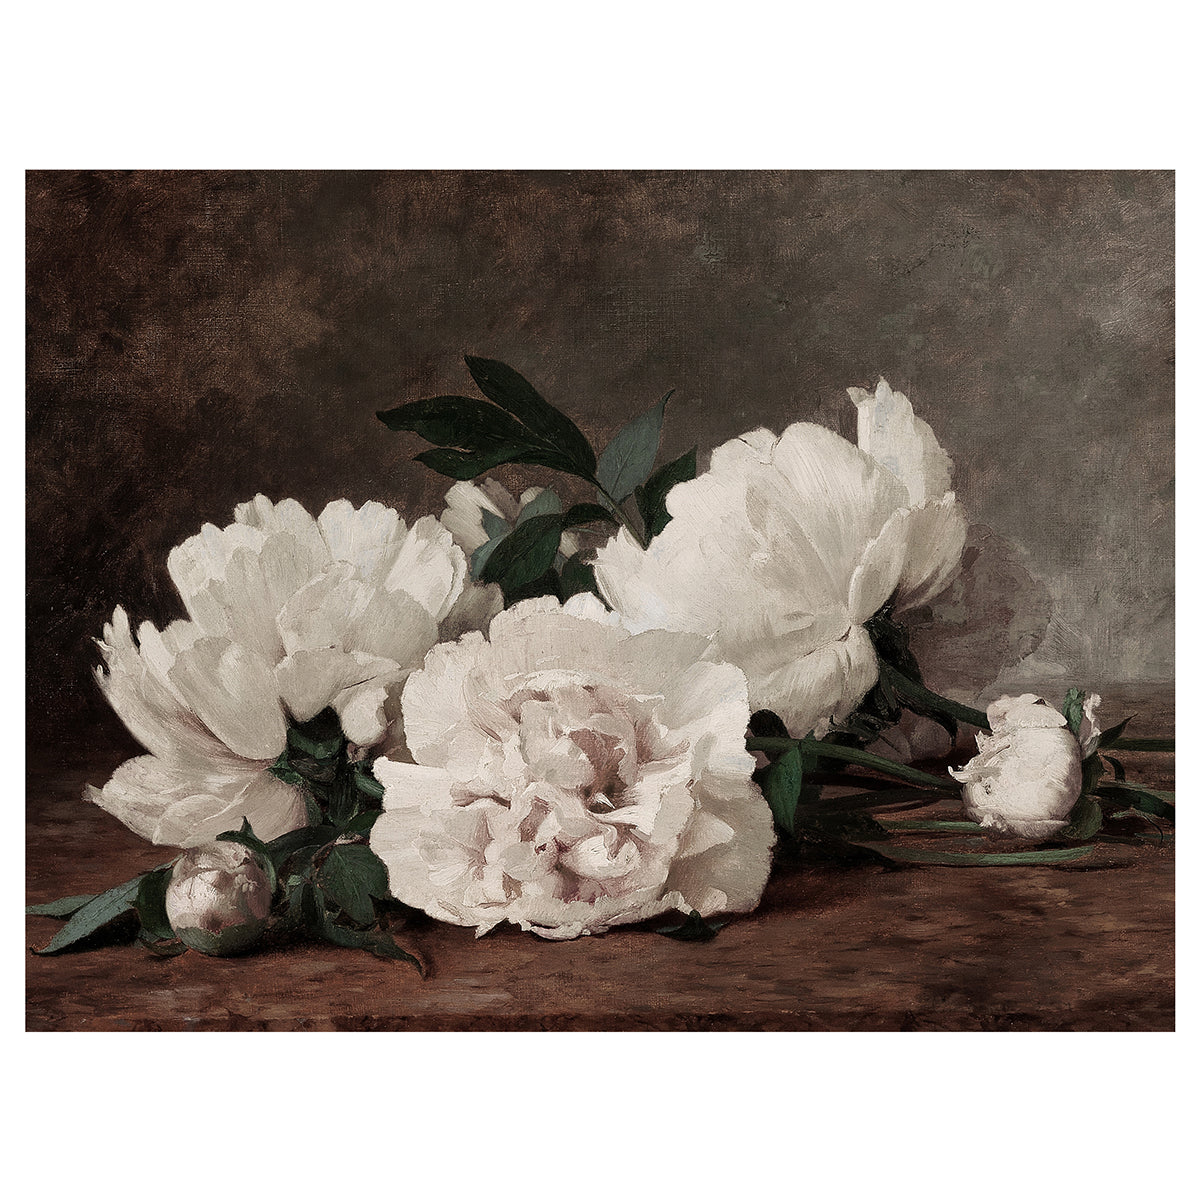 French Peonies – Love sort of